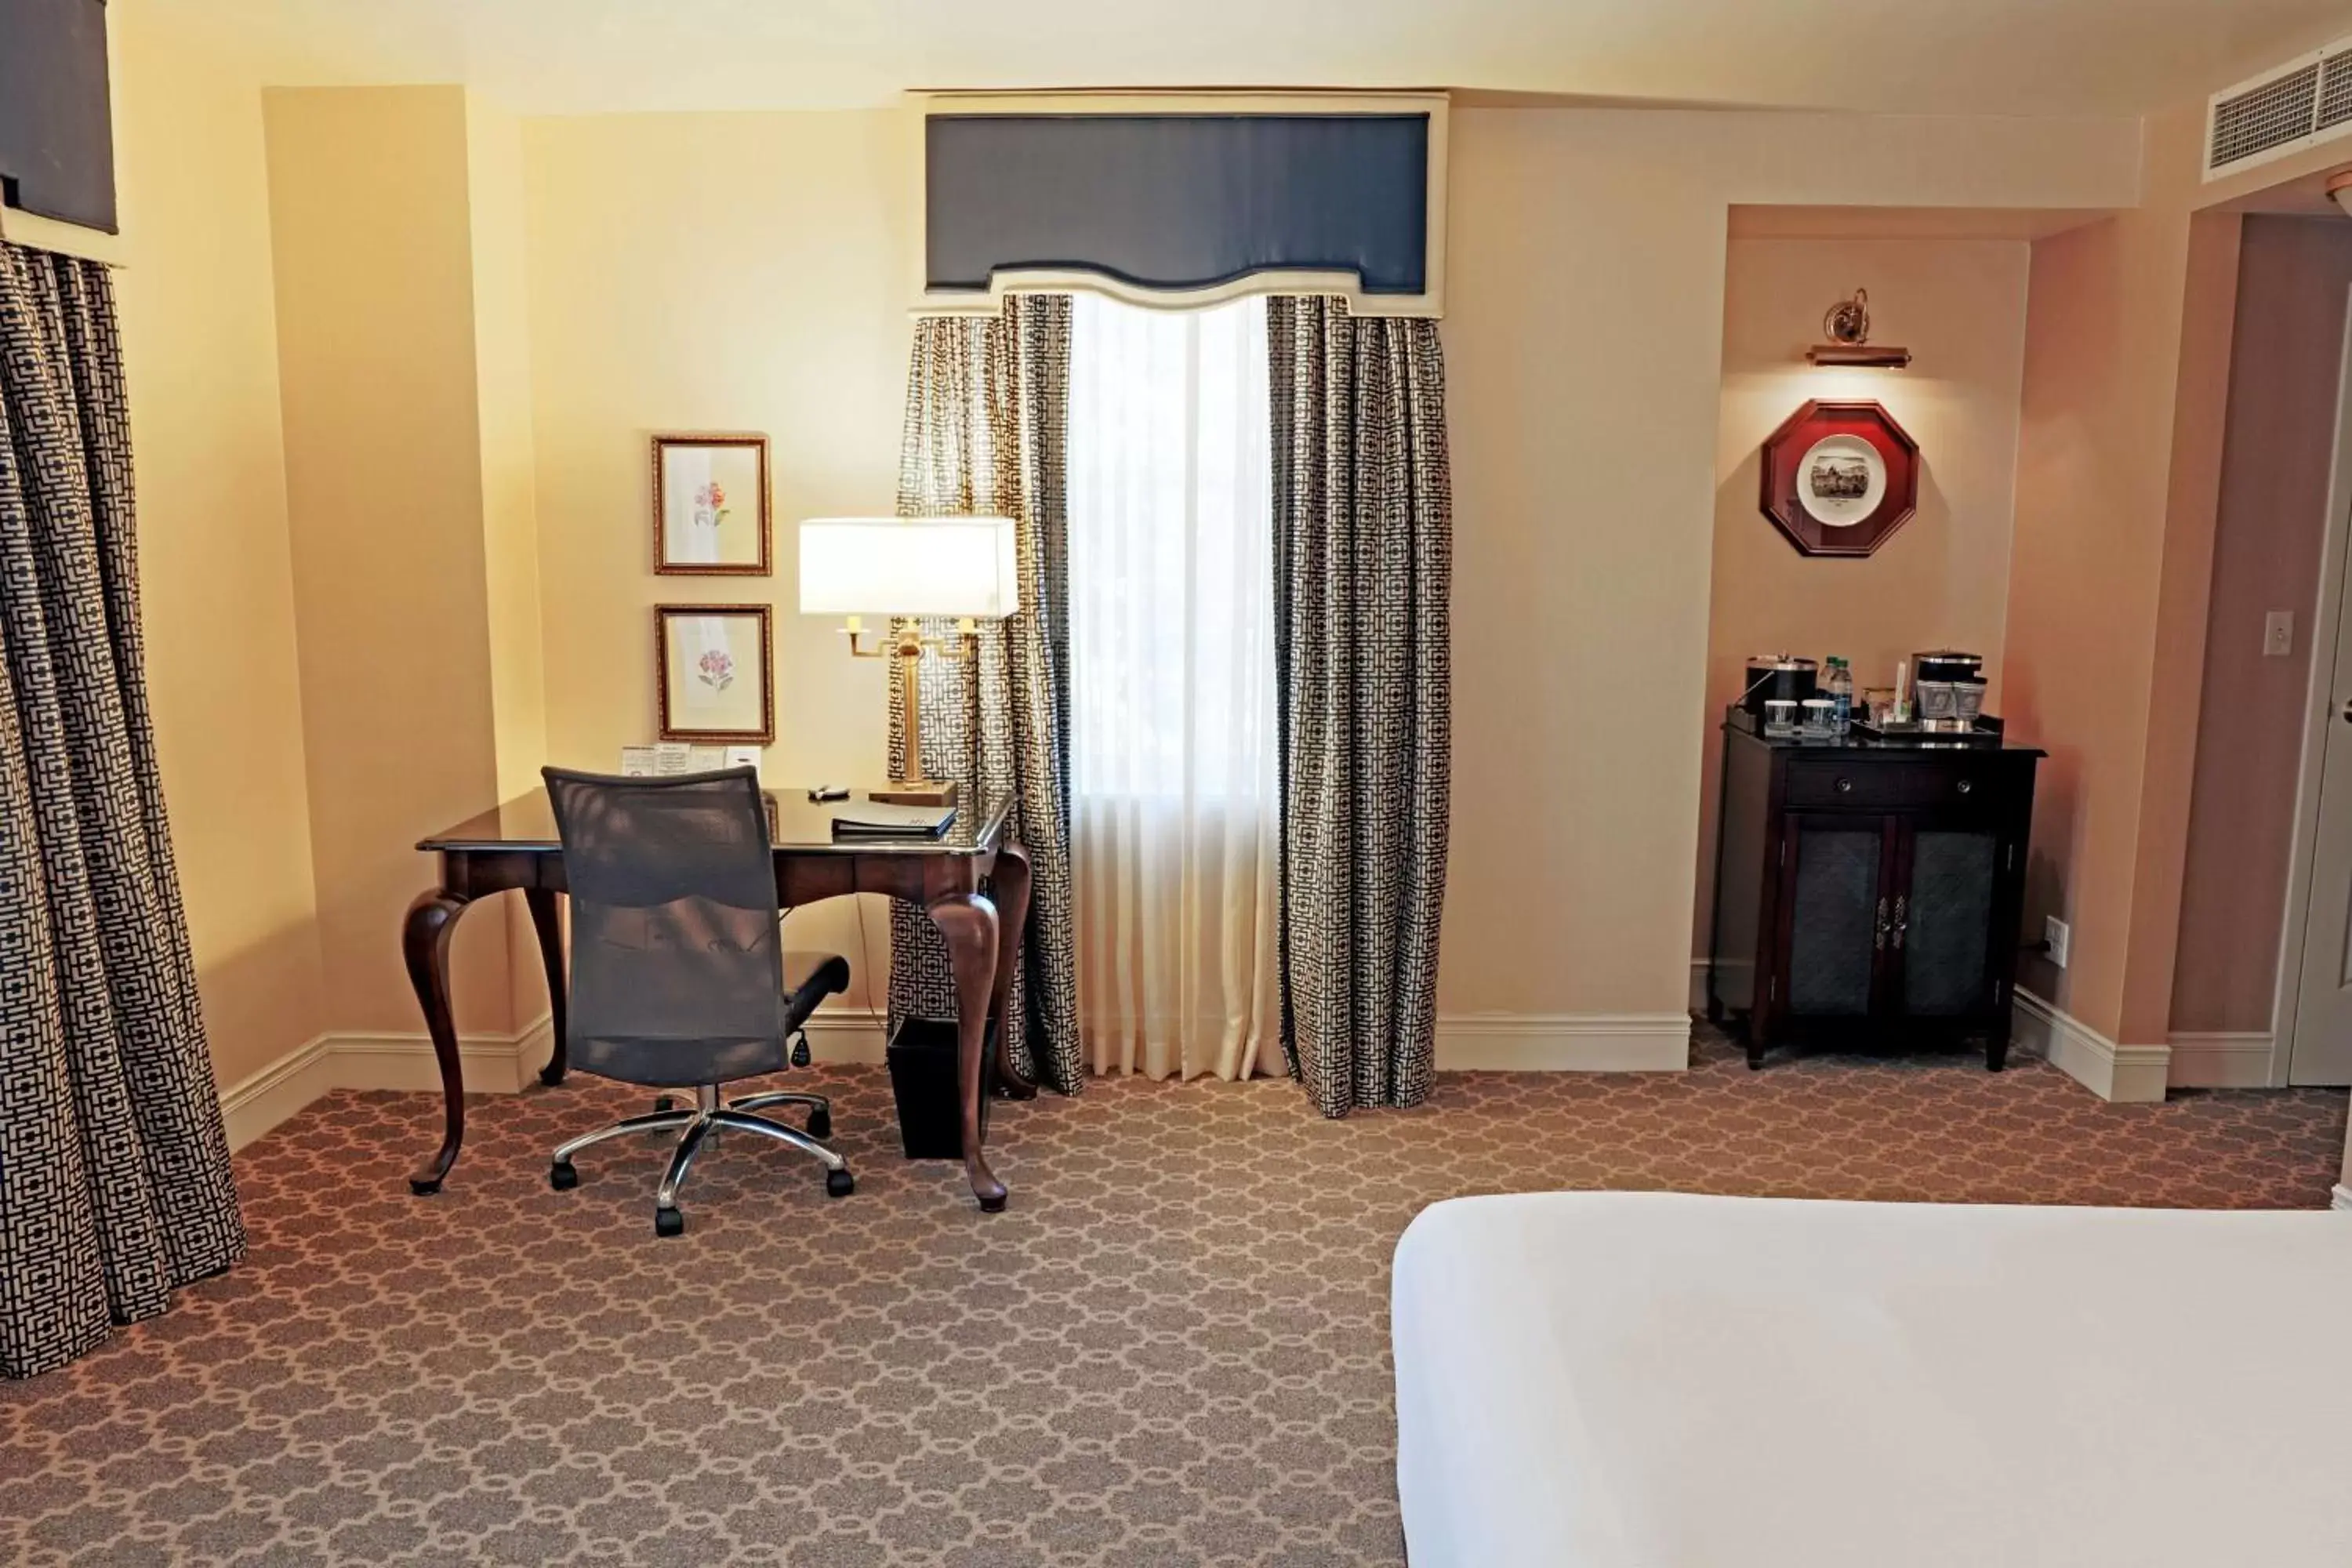 Bedroom in Hotel Roanoke & Conference Center, Curio Collection by Hilton